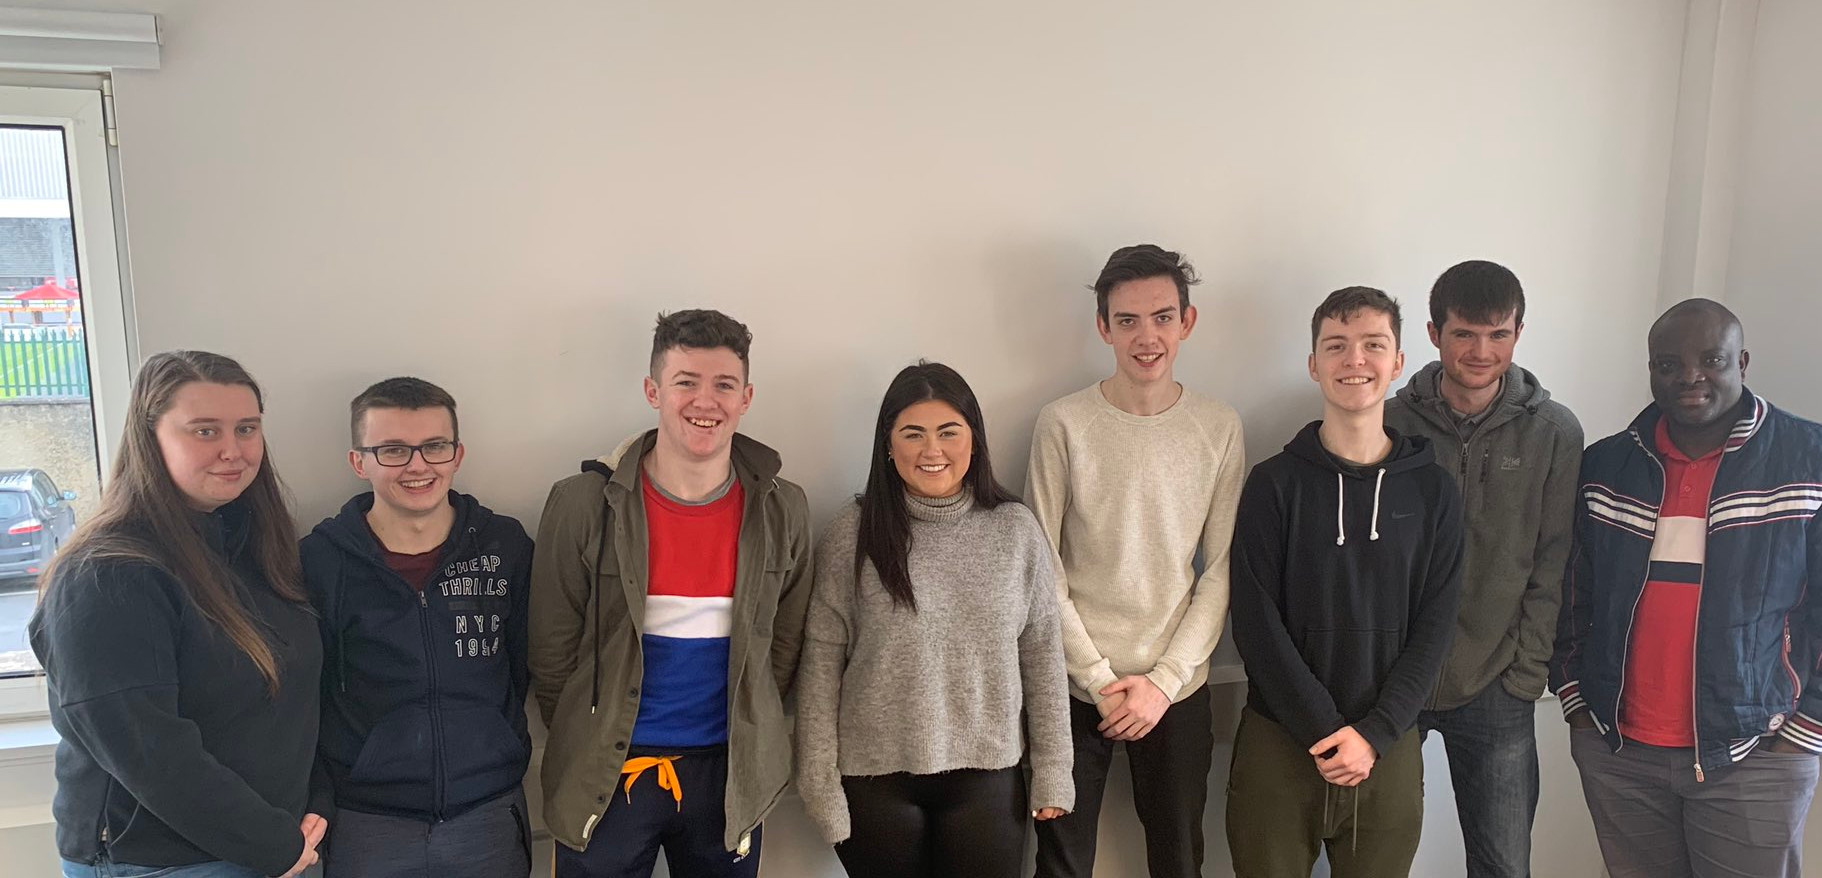 Limerick Institute of Technology students form Law Society